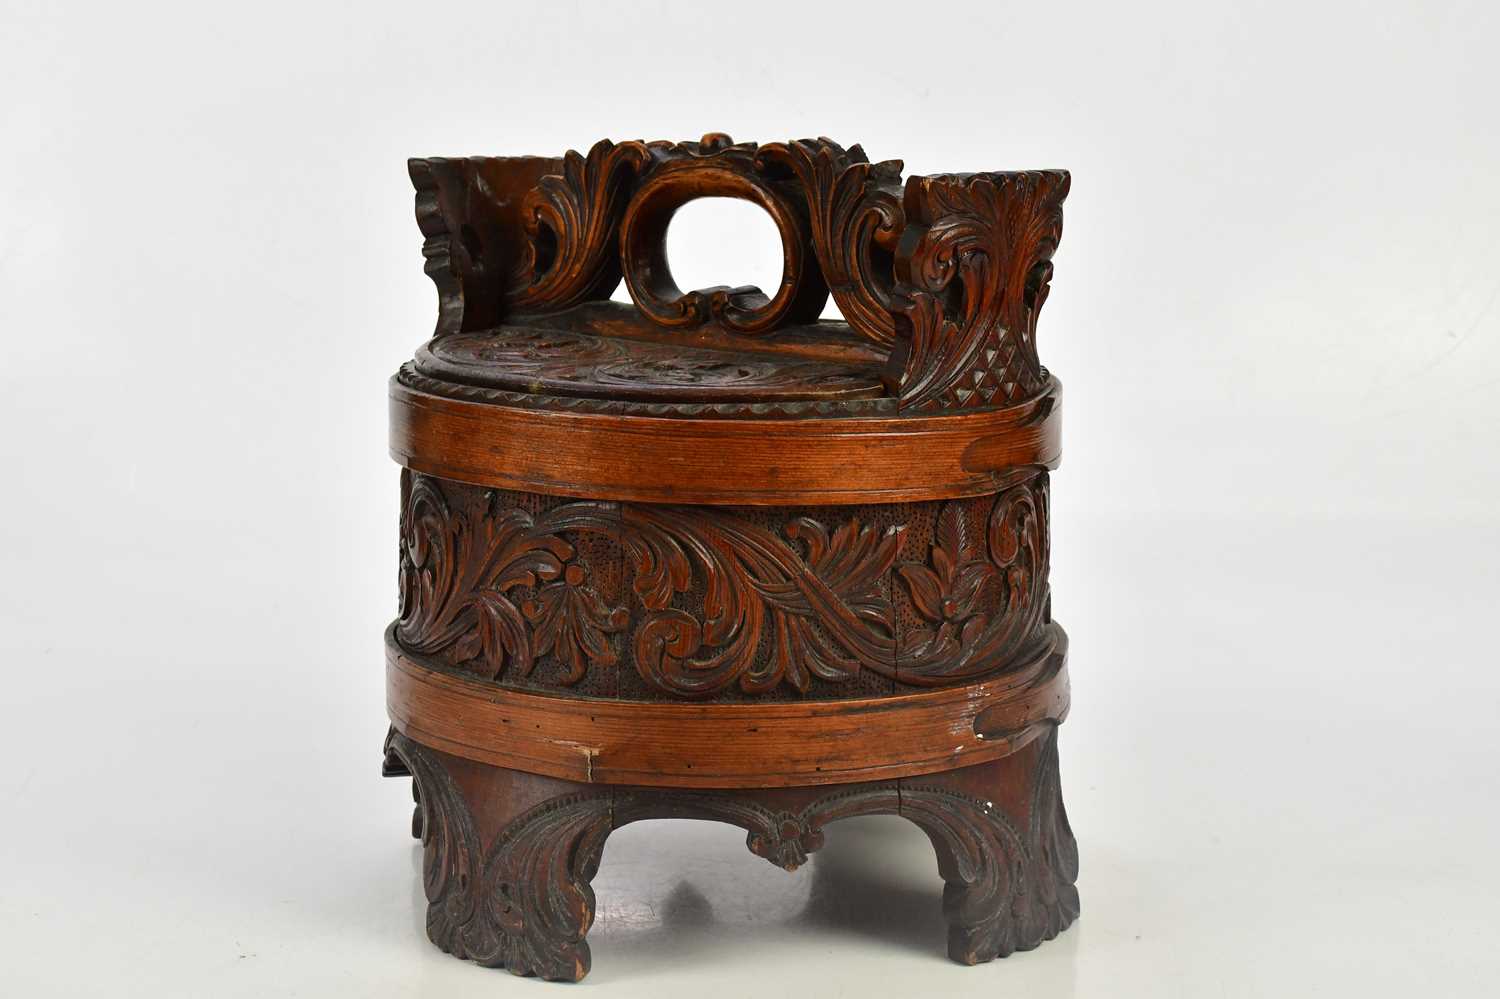 A Chinese carved wood wedding basket, height 29cm.